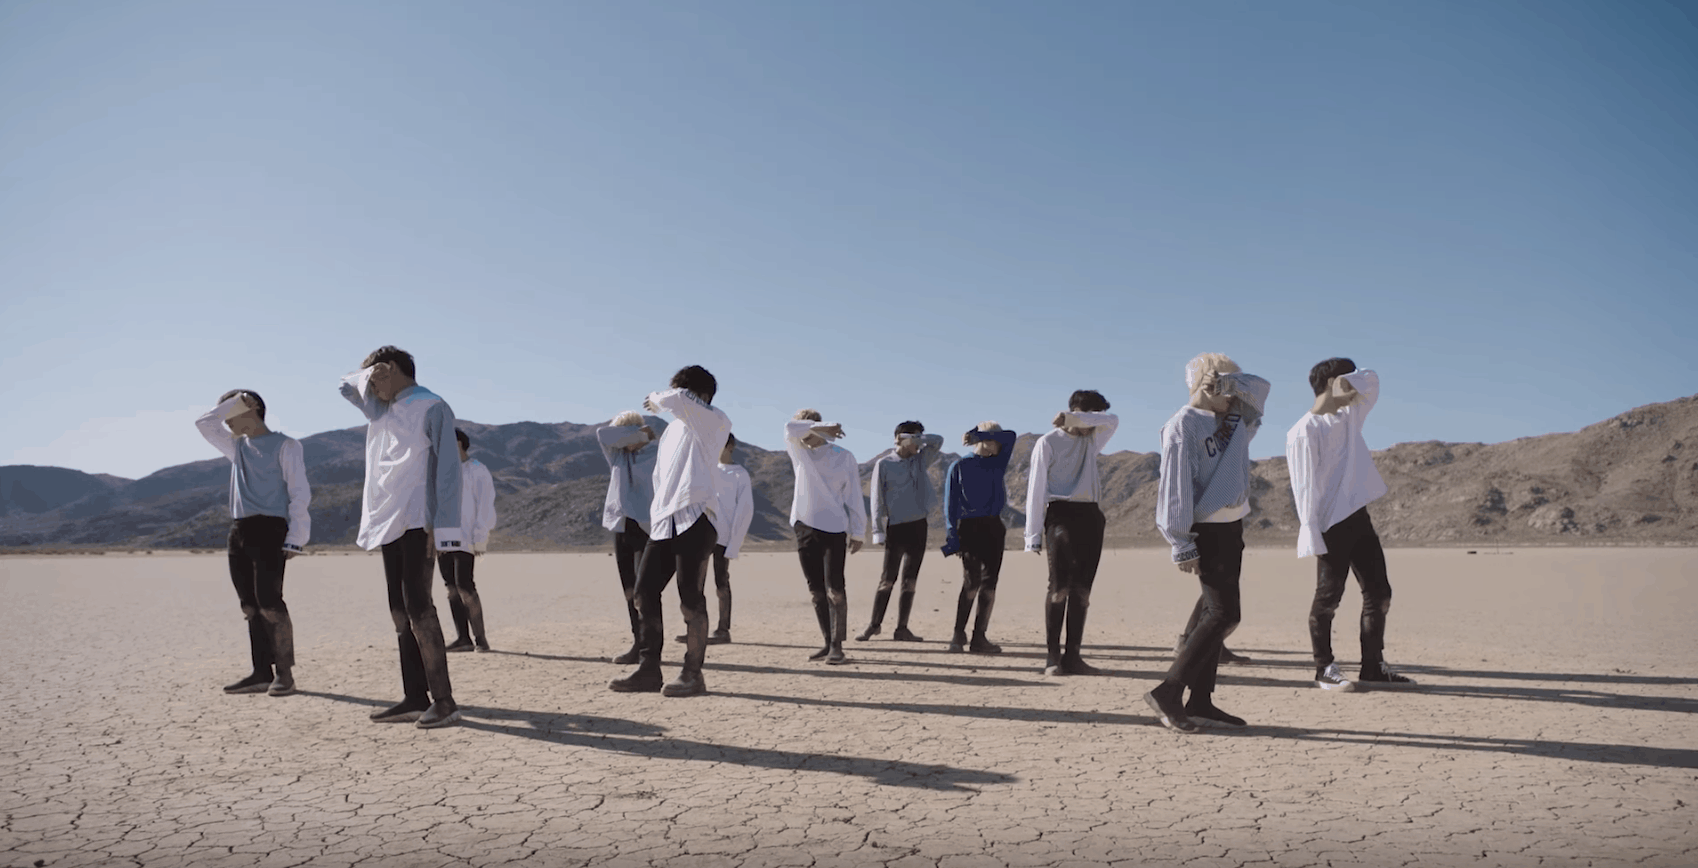 Seventeen kpop fashion: The members in the Don't Wanna Cry music video wearing white shirts and dark pants